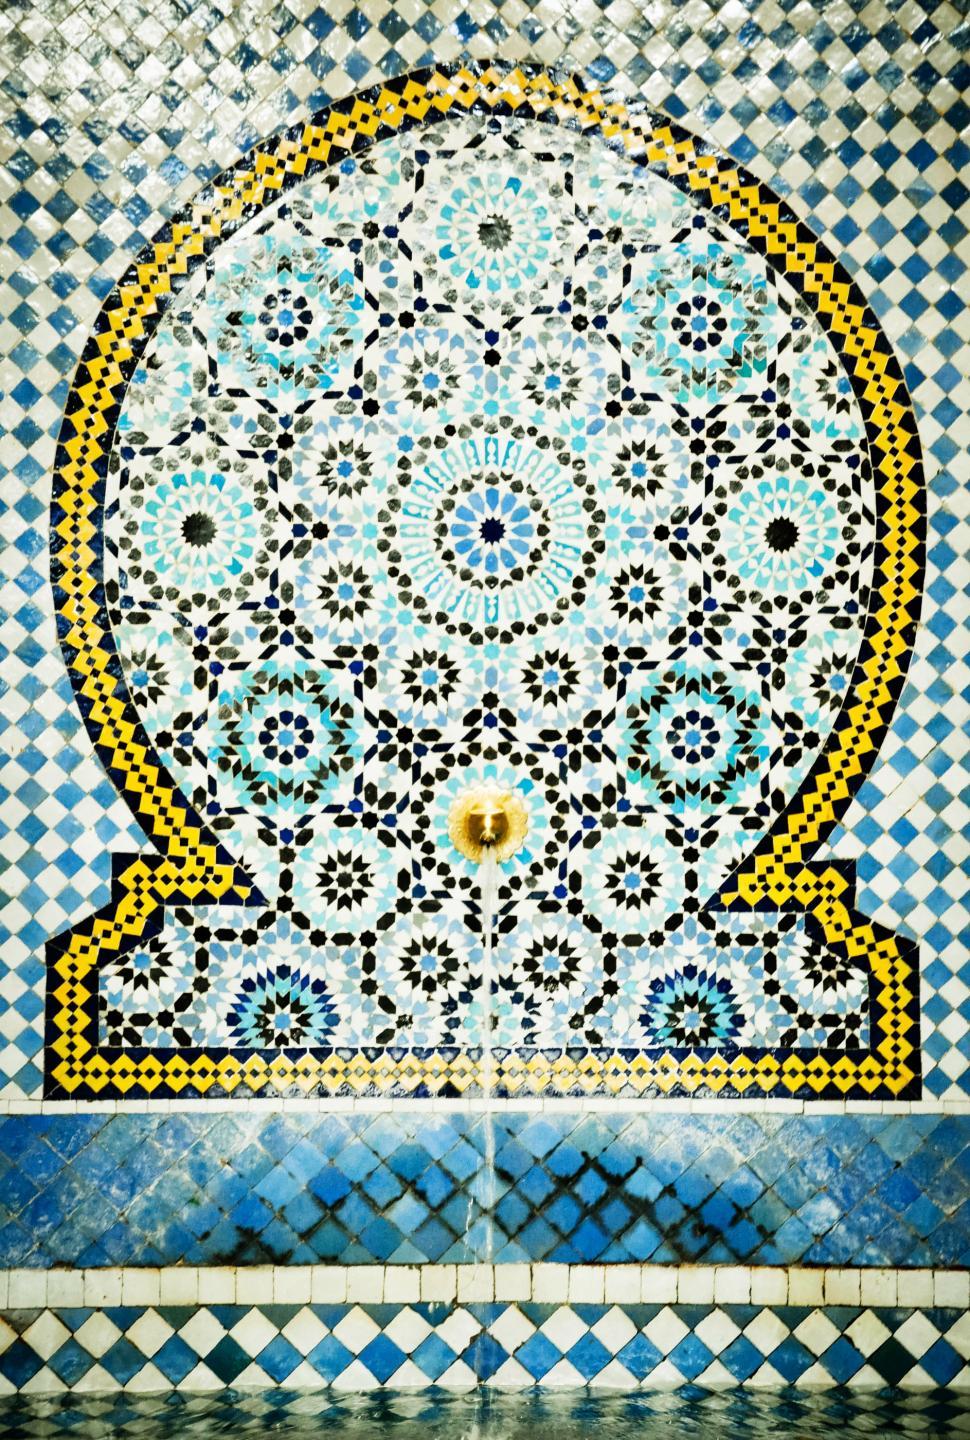 Free Image of Fountain of tiles 